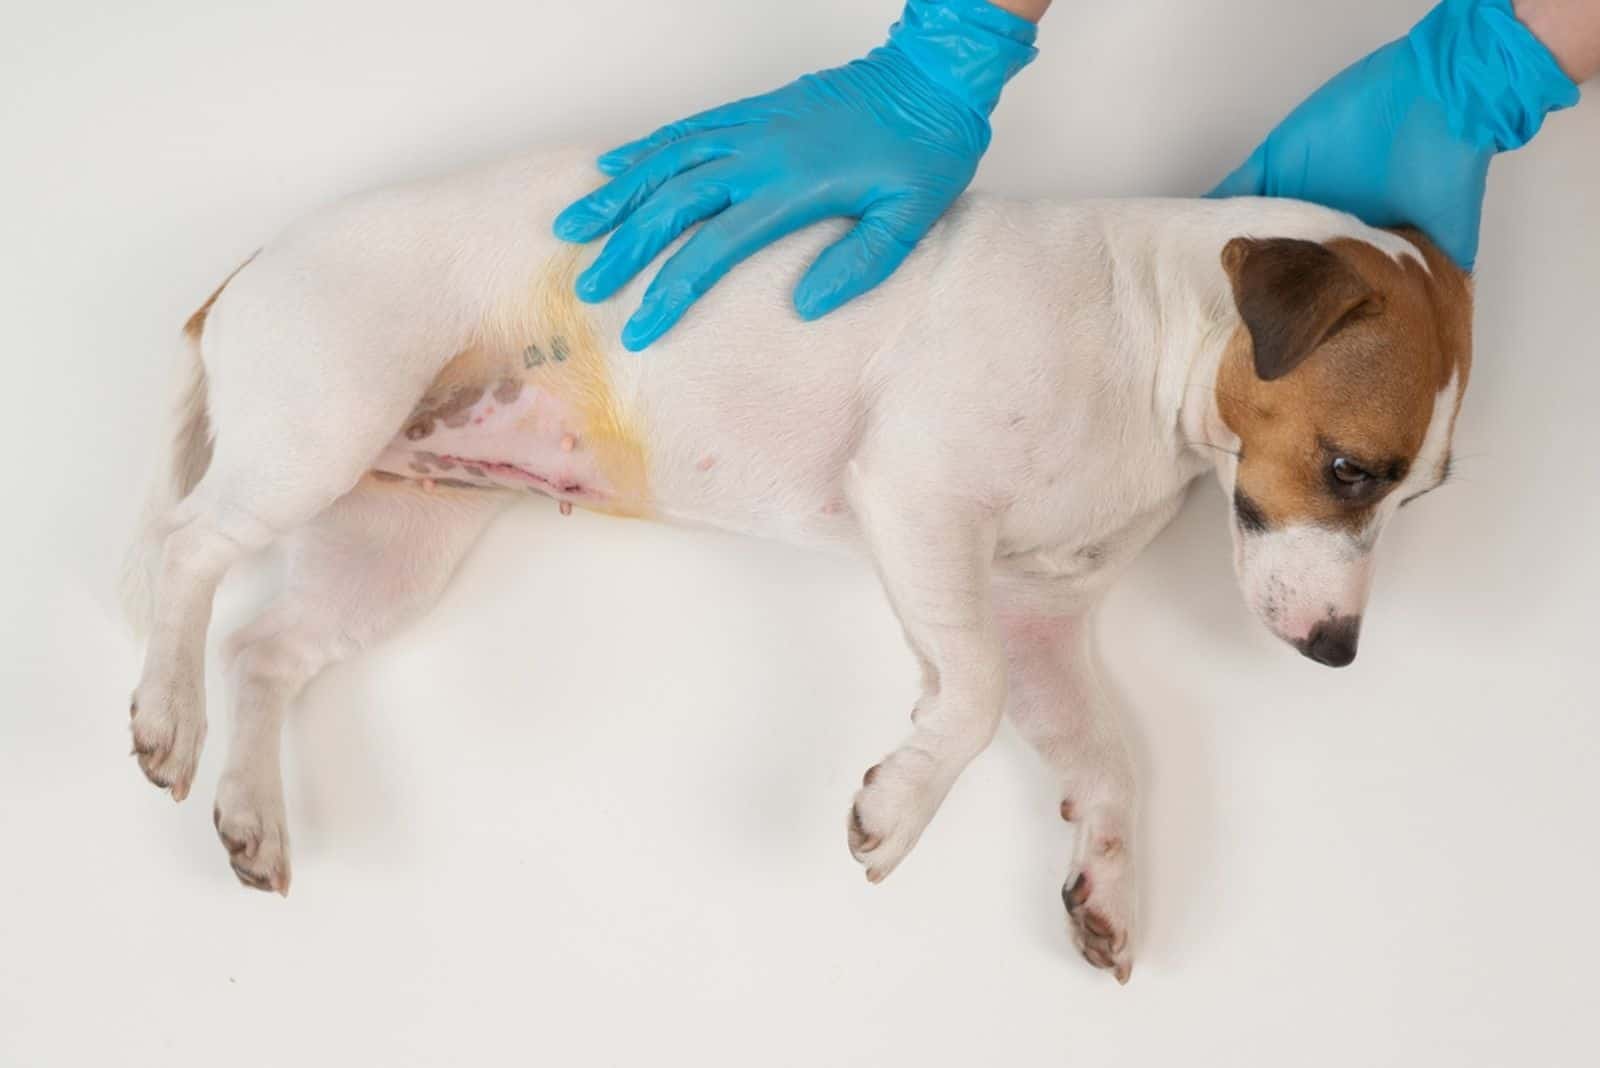 A veterinarian examines a Jack Russell Terrier dog